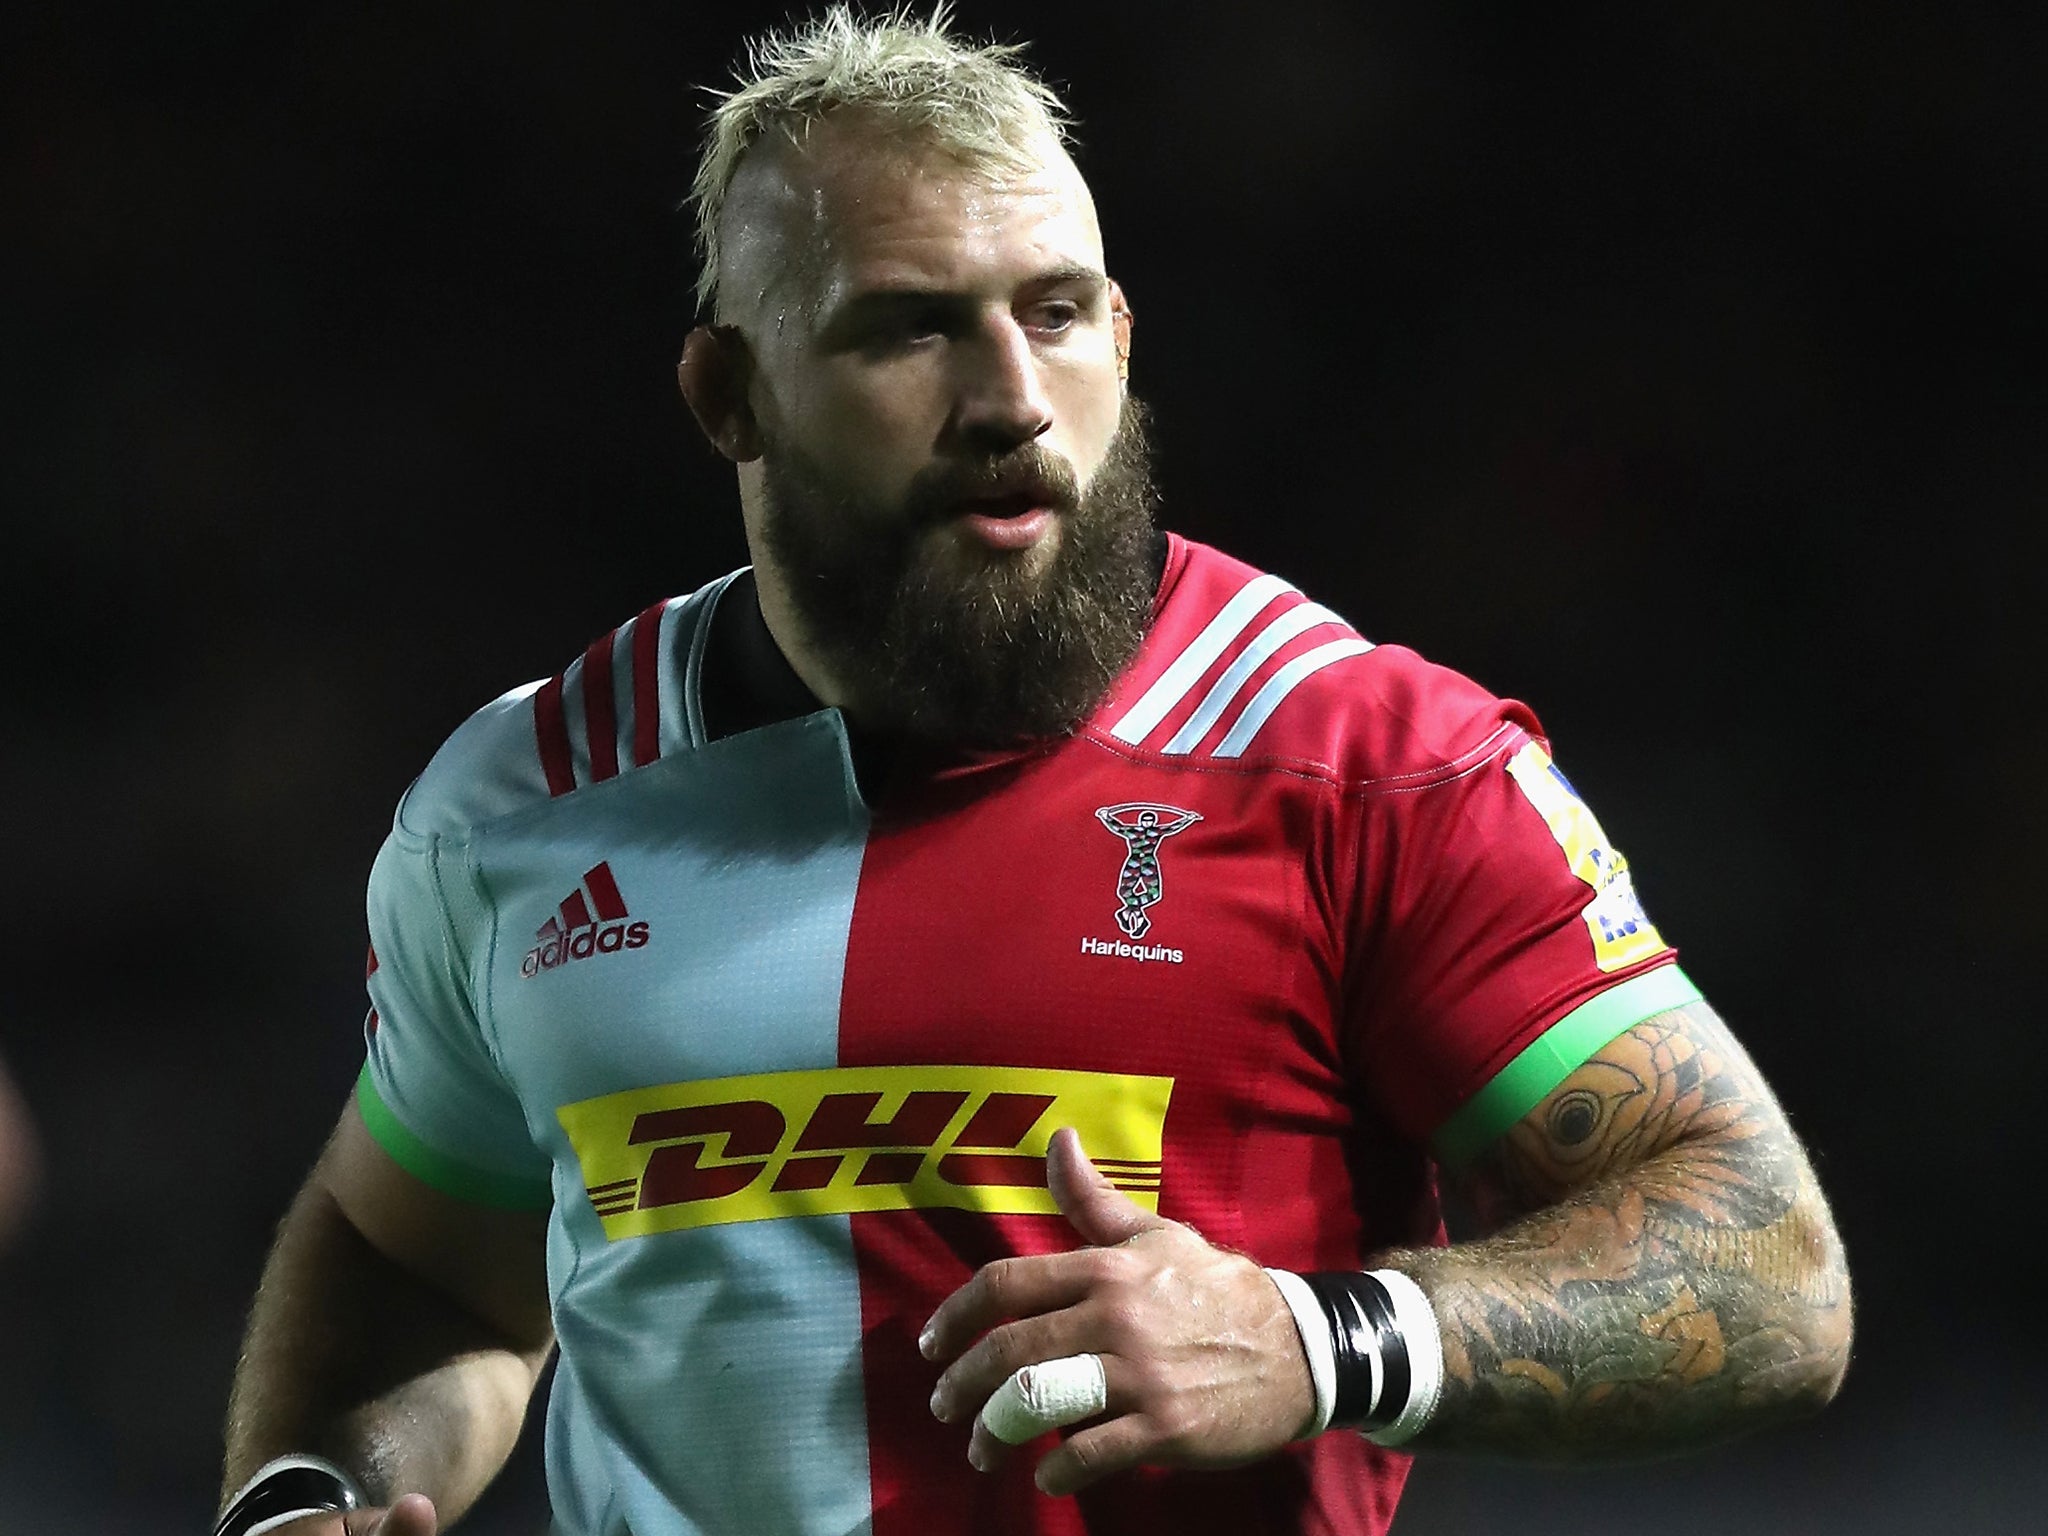 Joe Marler offered a damning verdict on his relationship with Marland Yarde